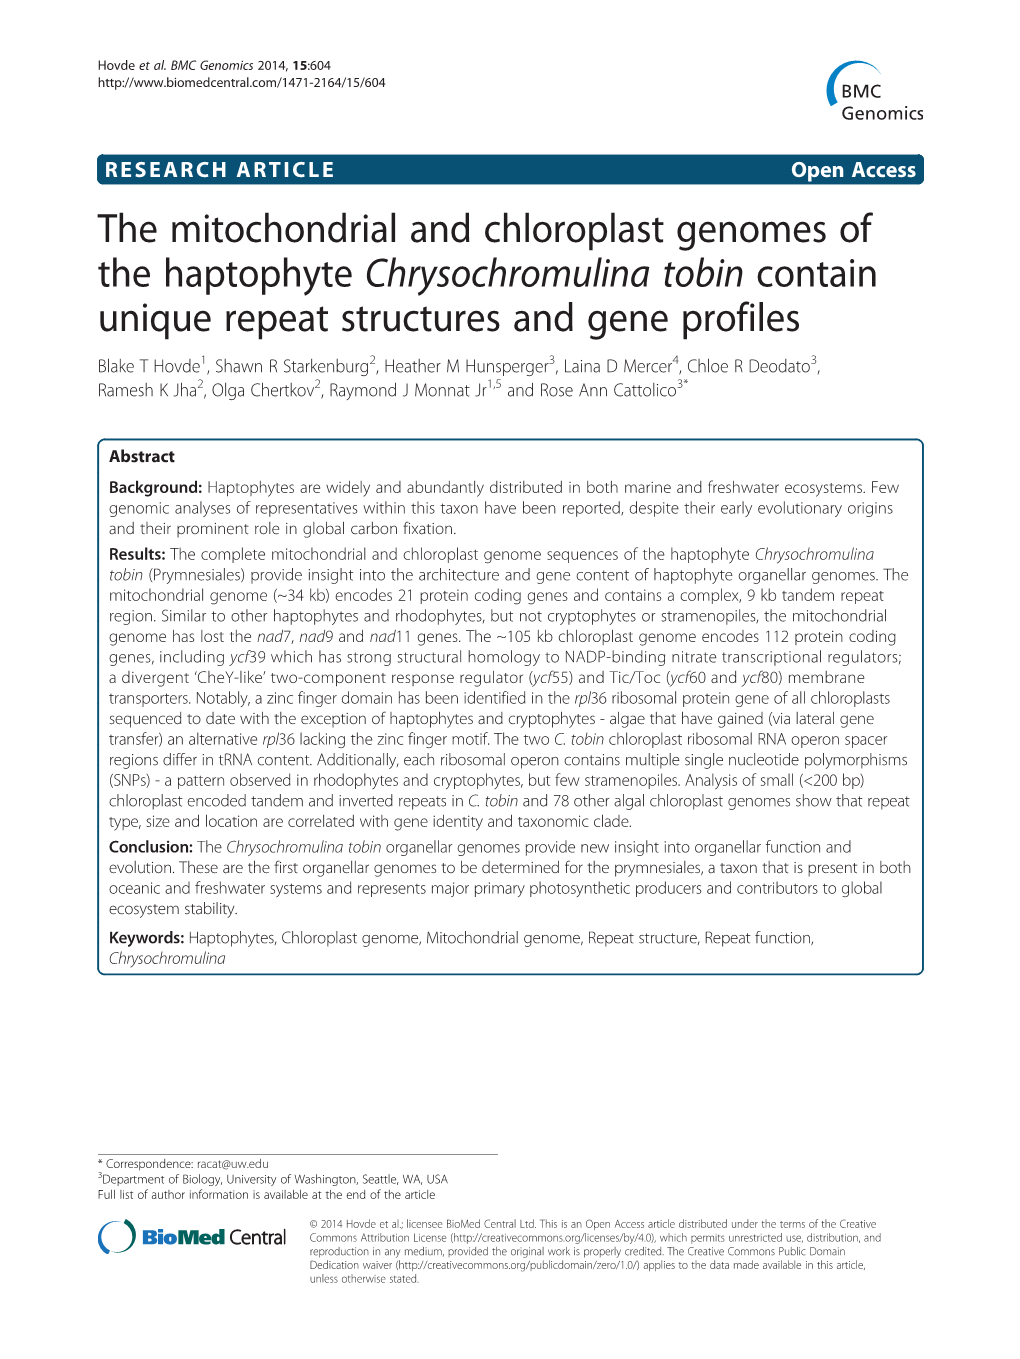 The Mitochondrial and Chloroplast Genomes of the Haptophyte Chrysochromulina Tobin Contain Unique Repeat Structures and Gene